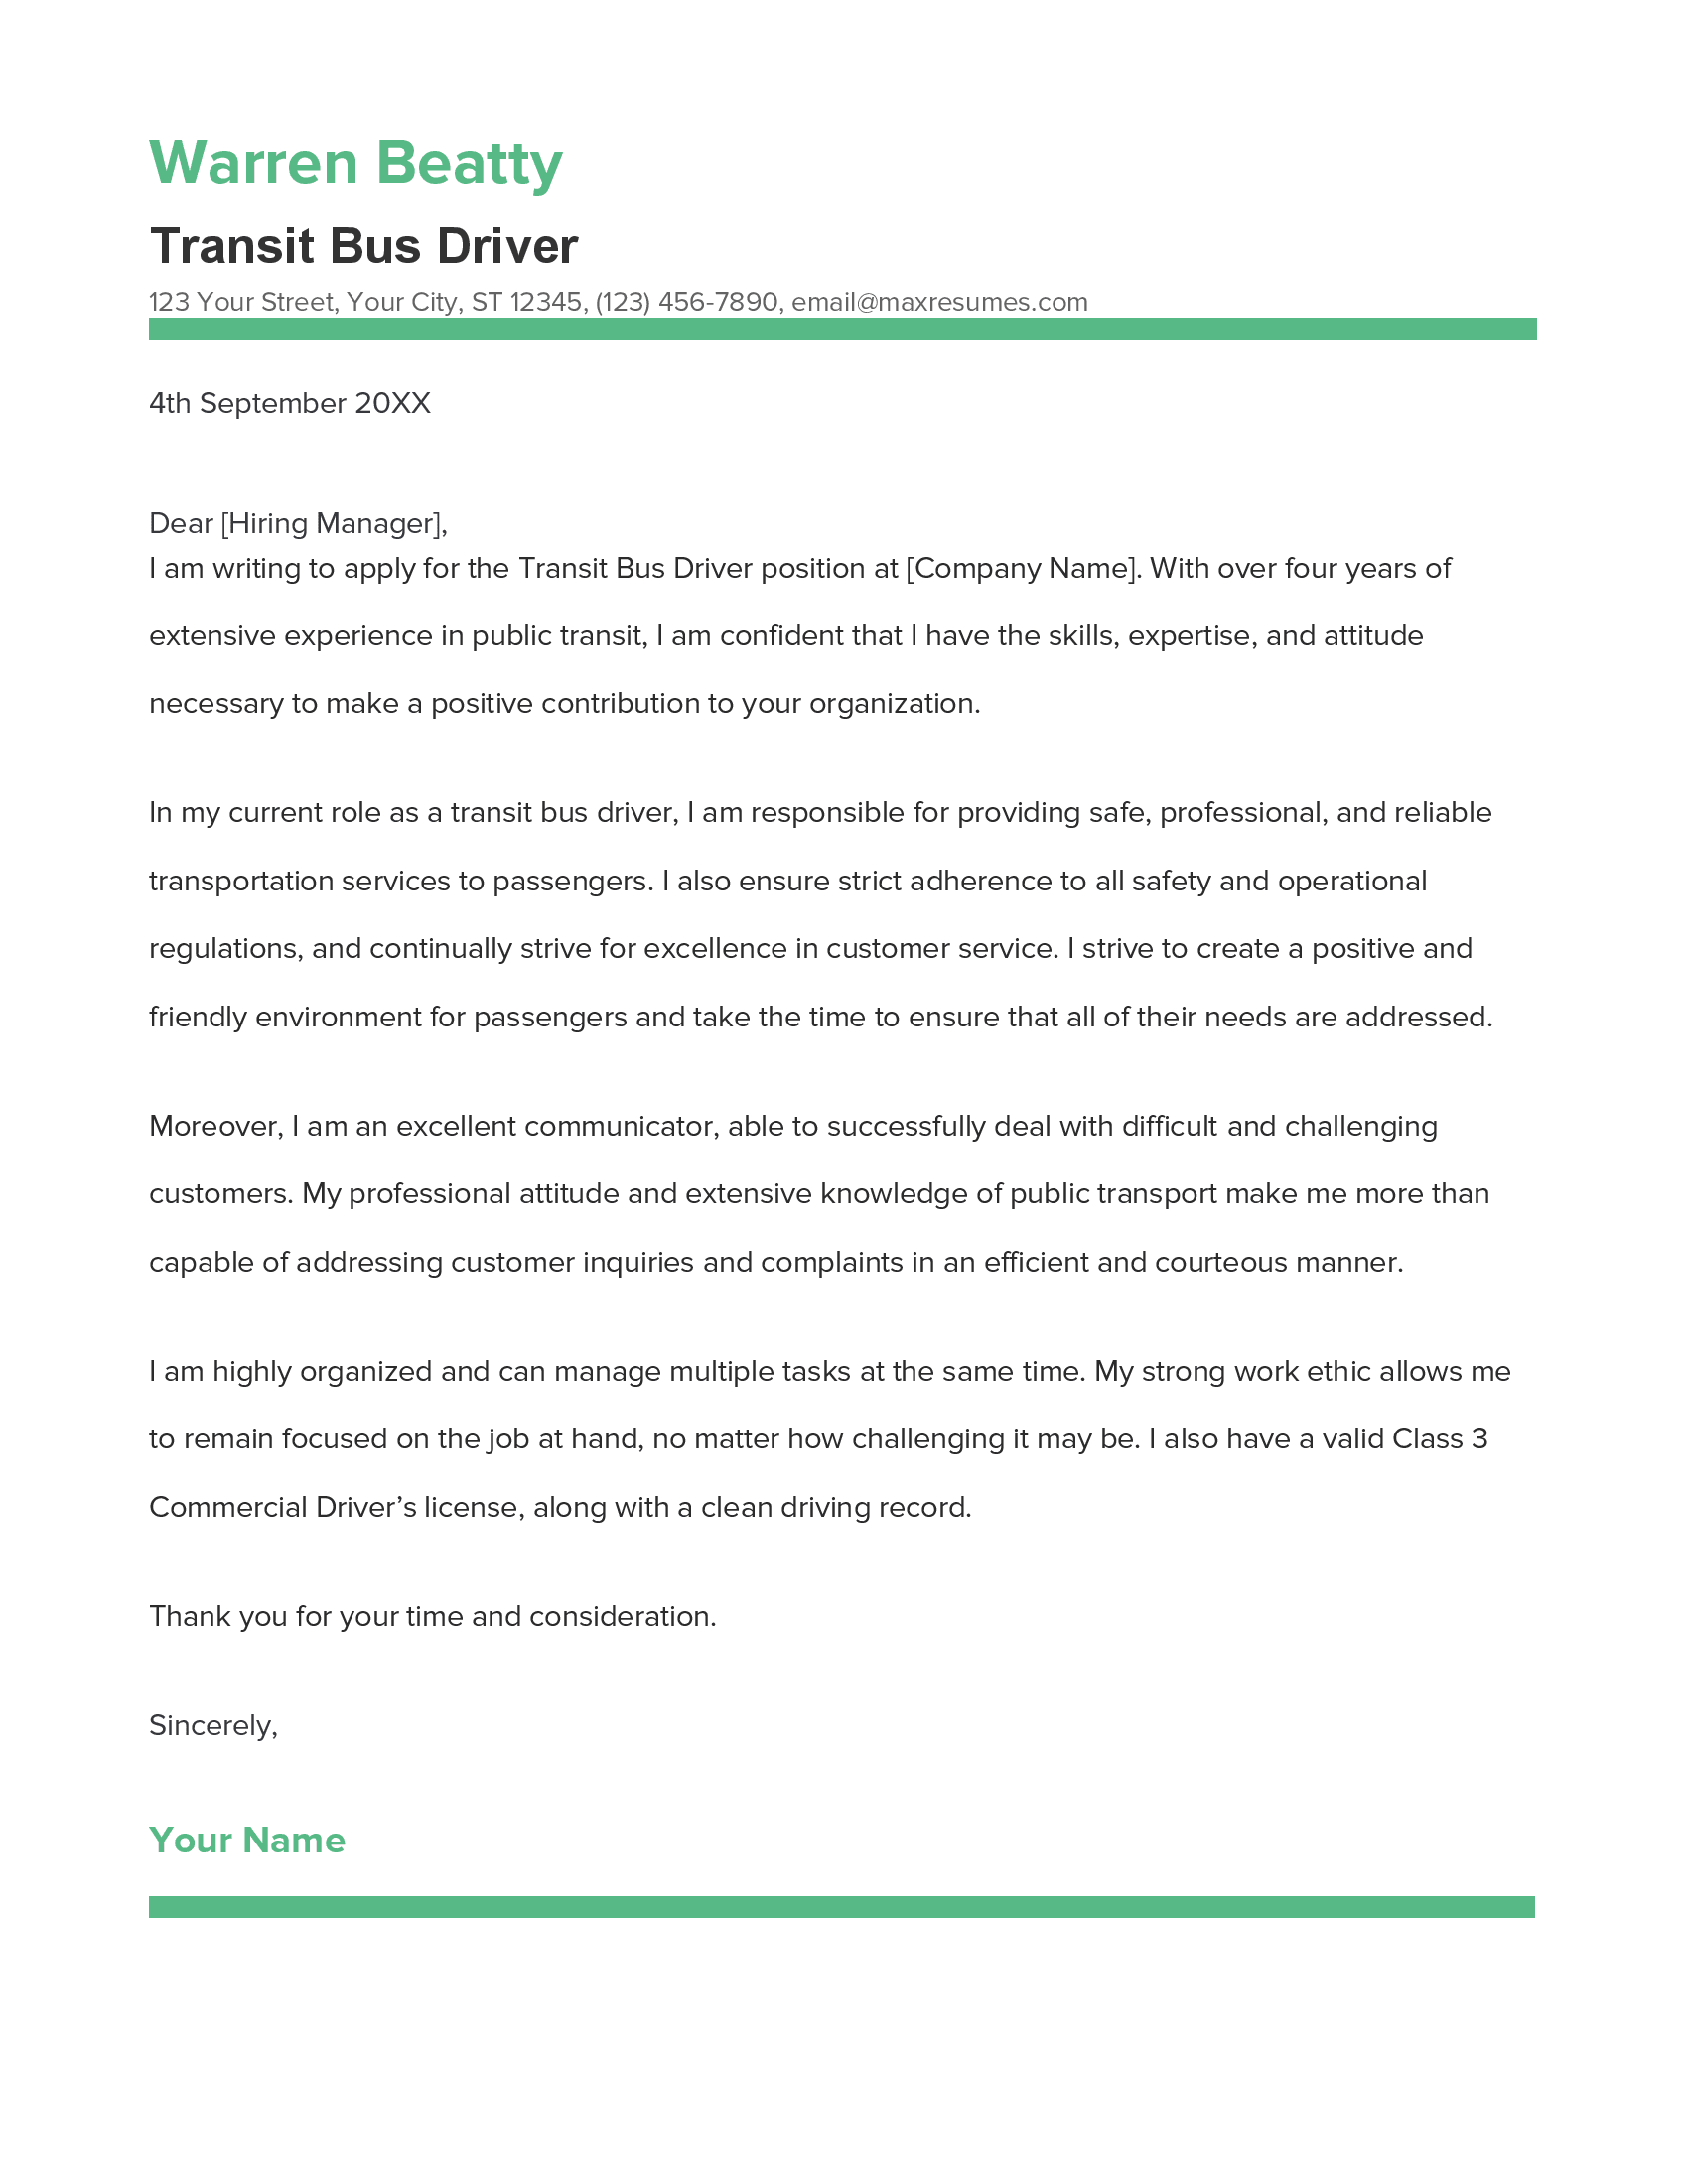 Transit Bus Driver Cover Letter Example